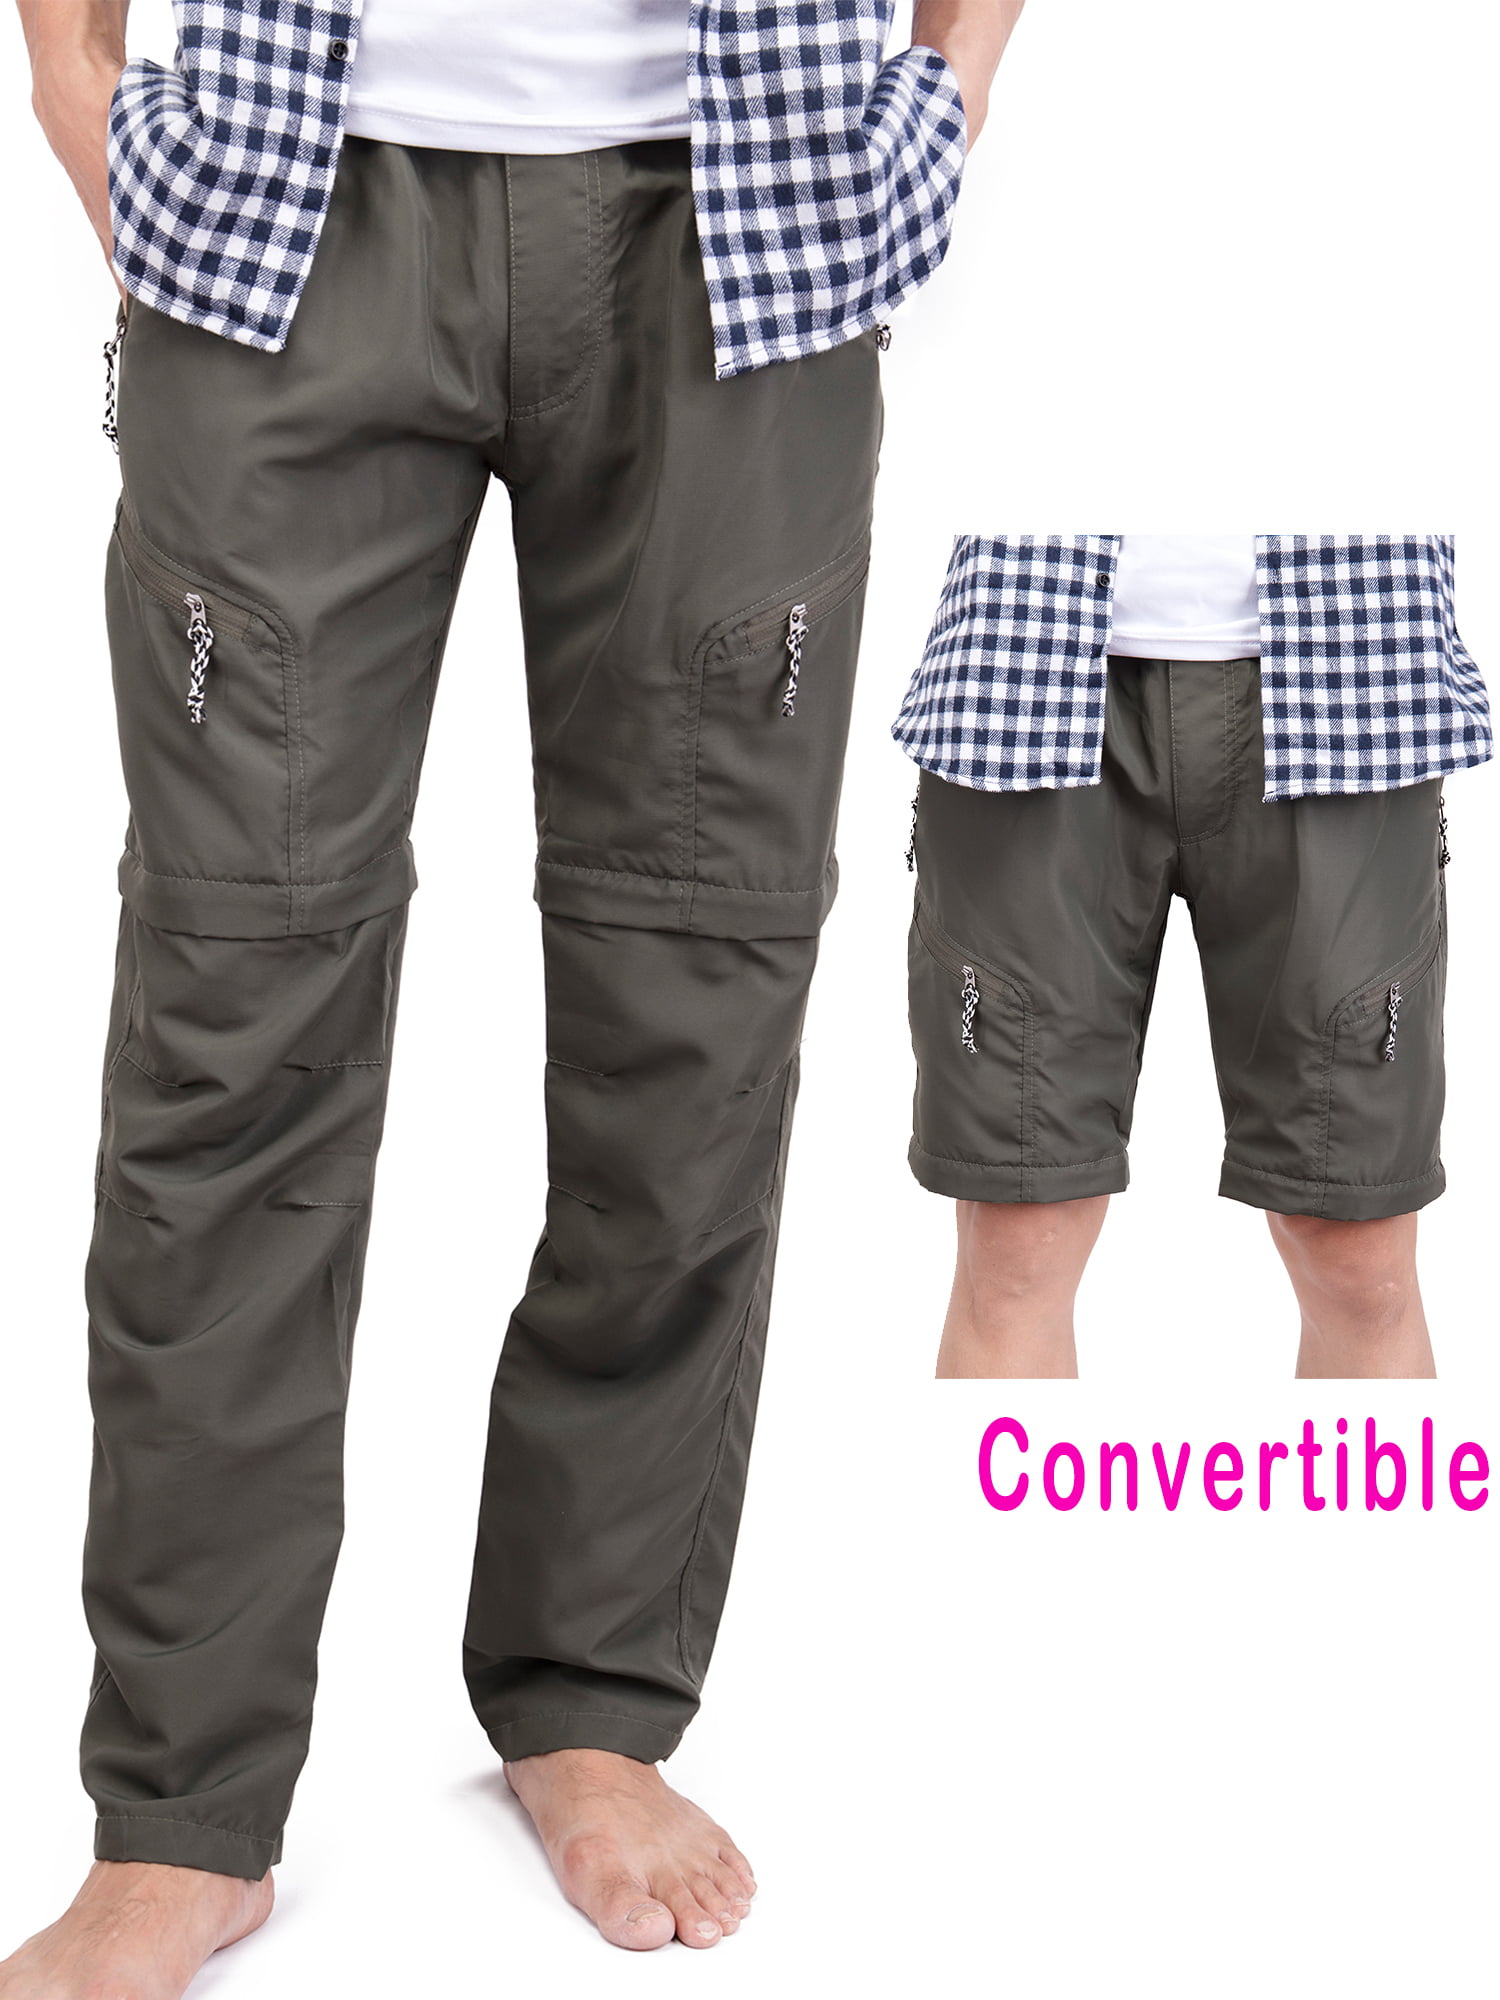 Mens Quick Dry Zip Off Convertible Pants Shorts Outdoor Hiking Loose Trousers US 